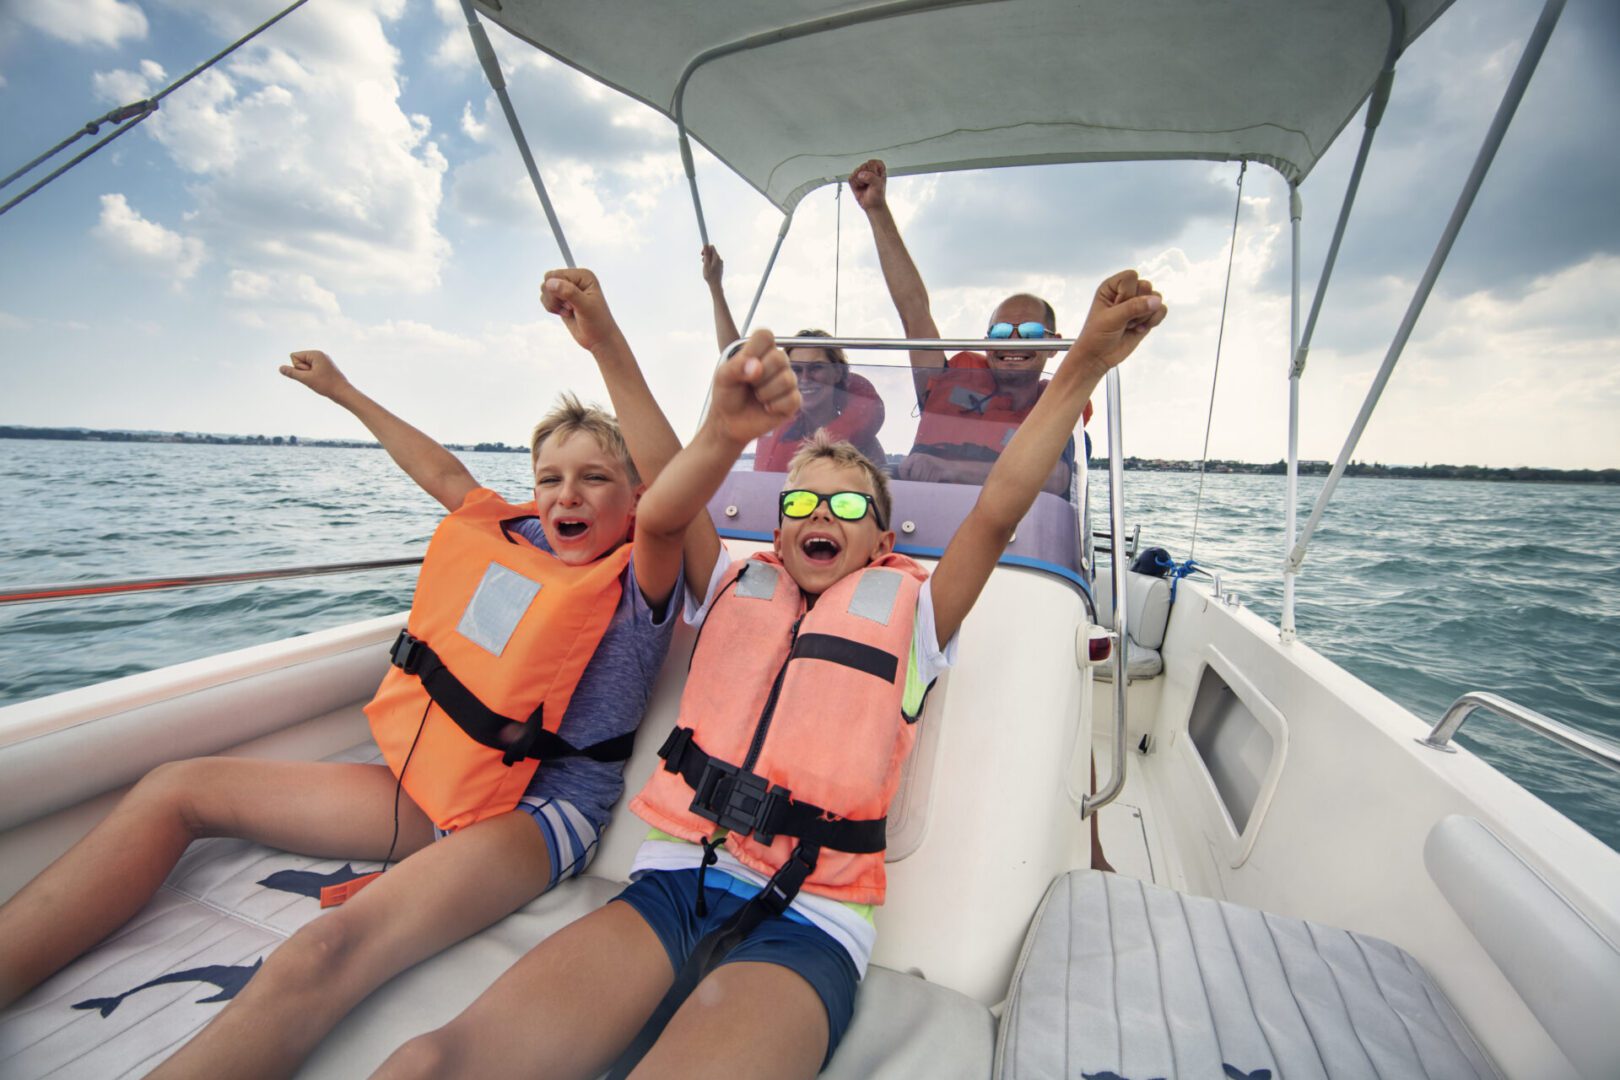 Floating your boat: Safety tips for recreational boaters